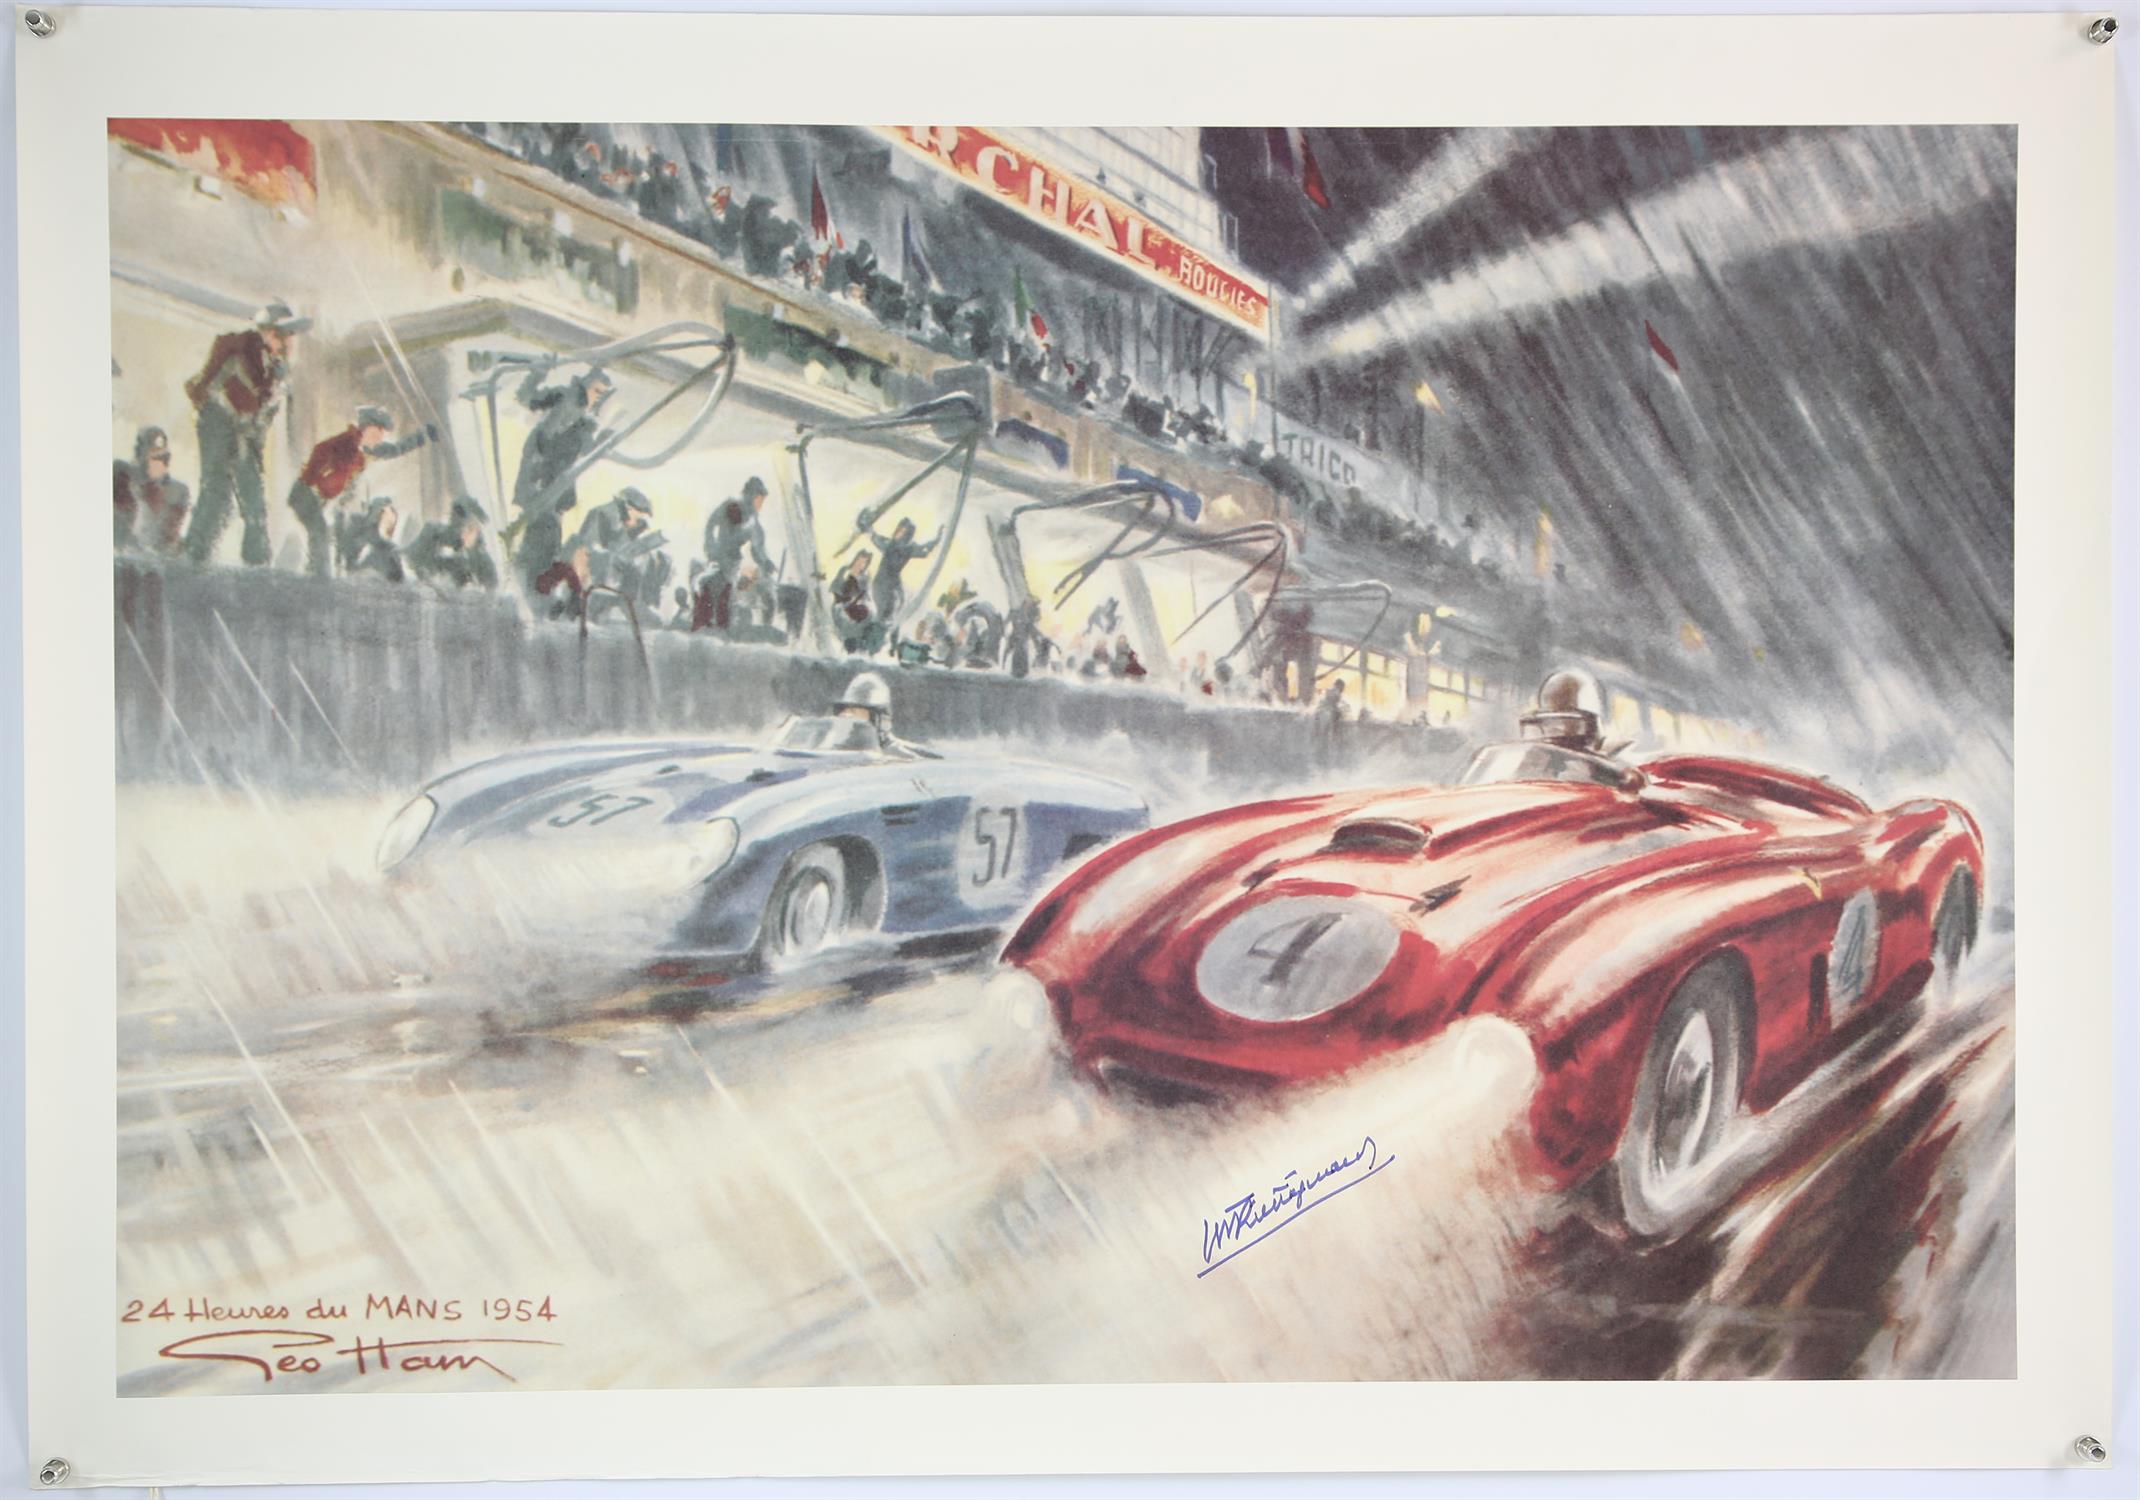 A Collection of 5 Large Geo Ham Racing Lithographs - To include, Signed Maurice Trintignant showing